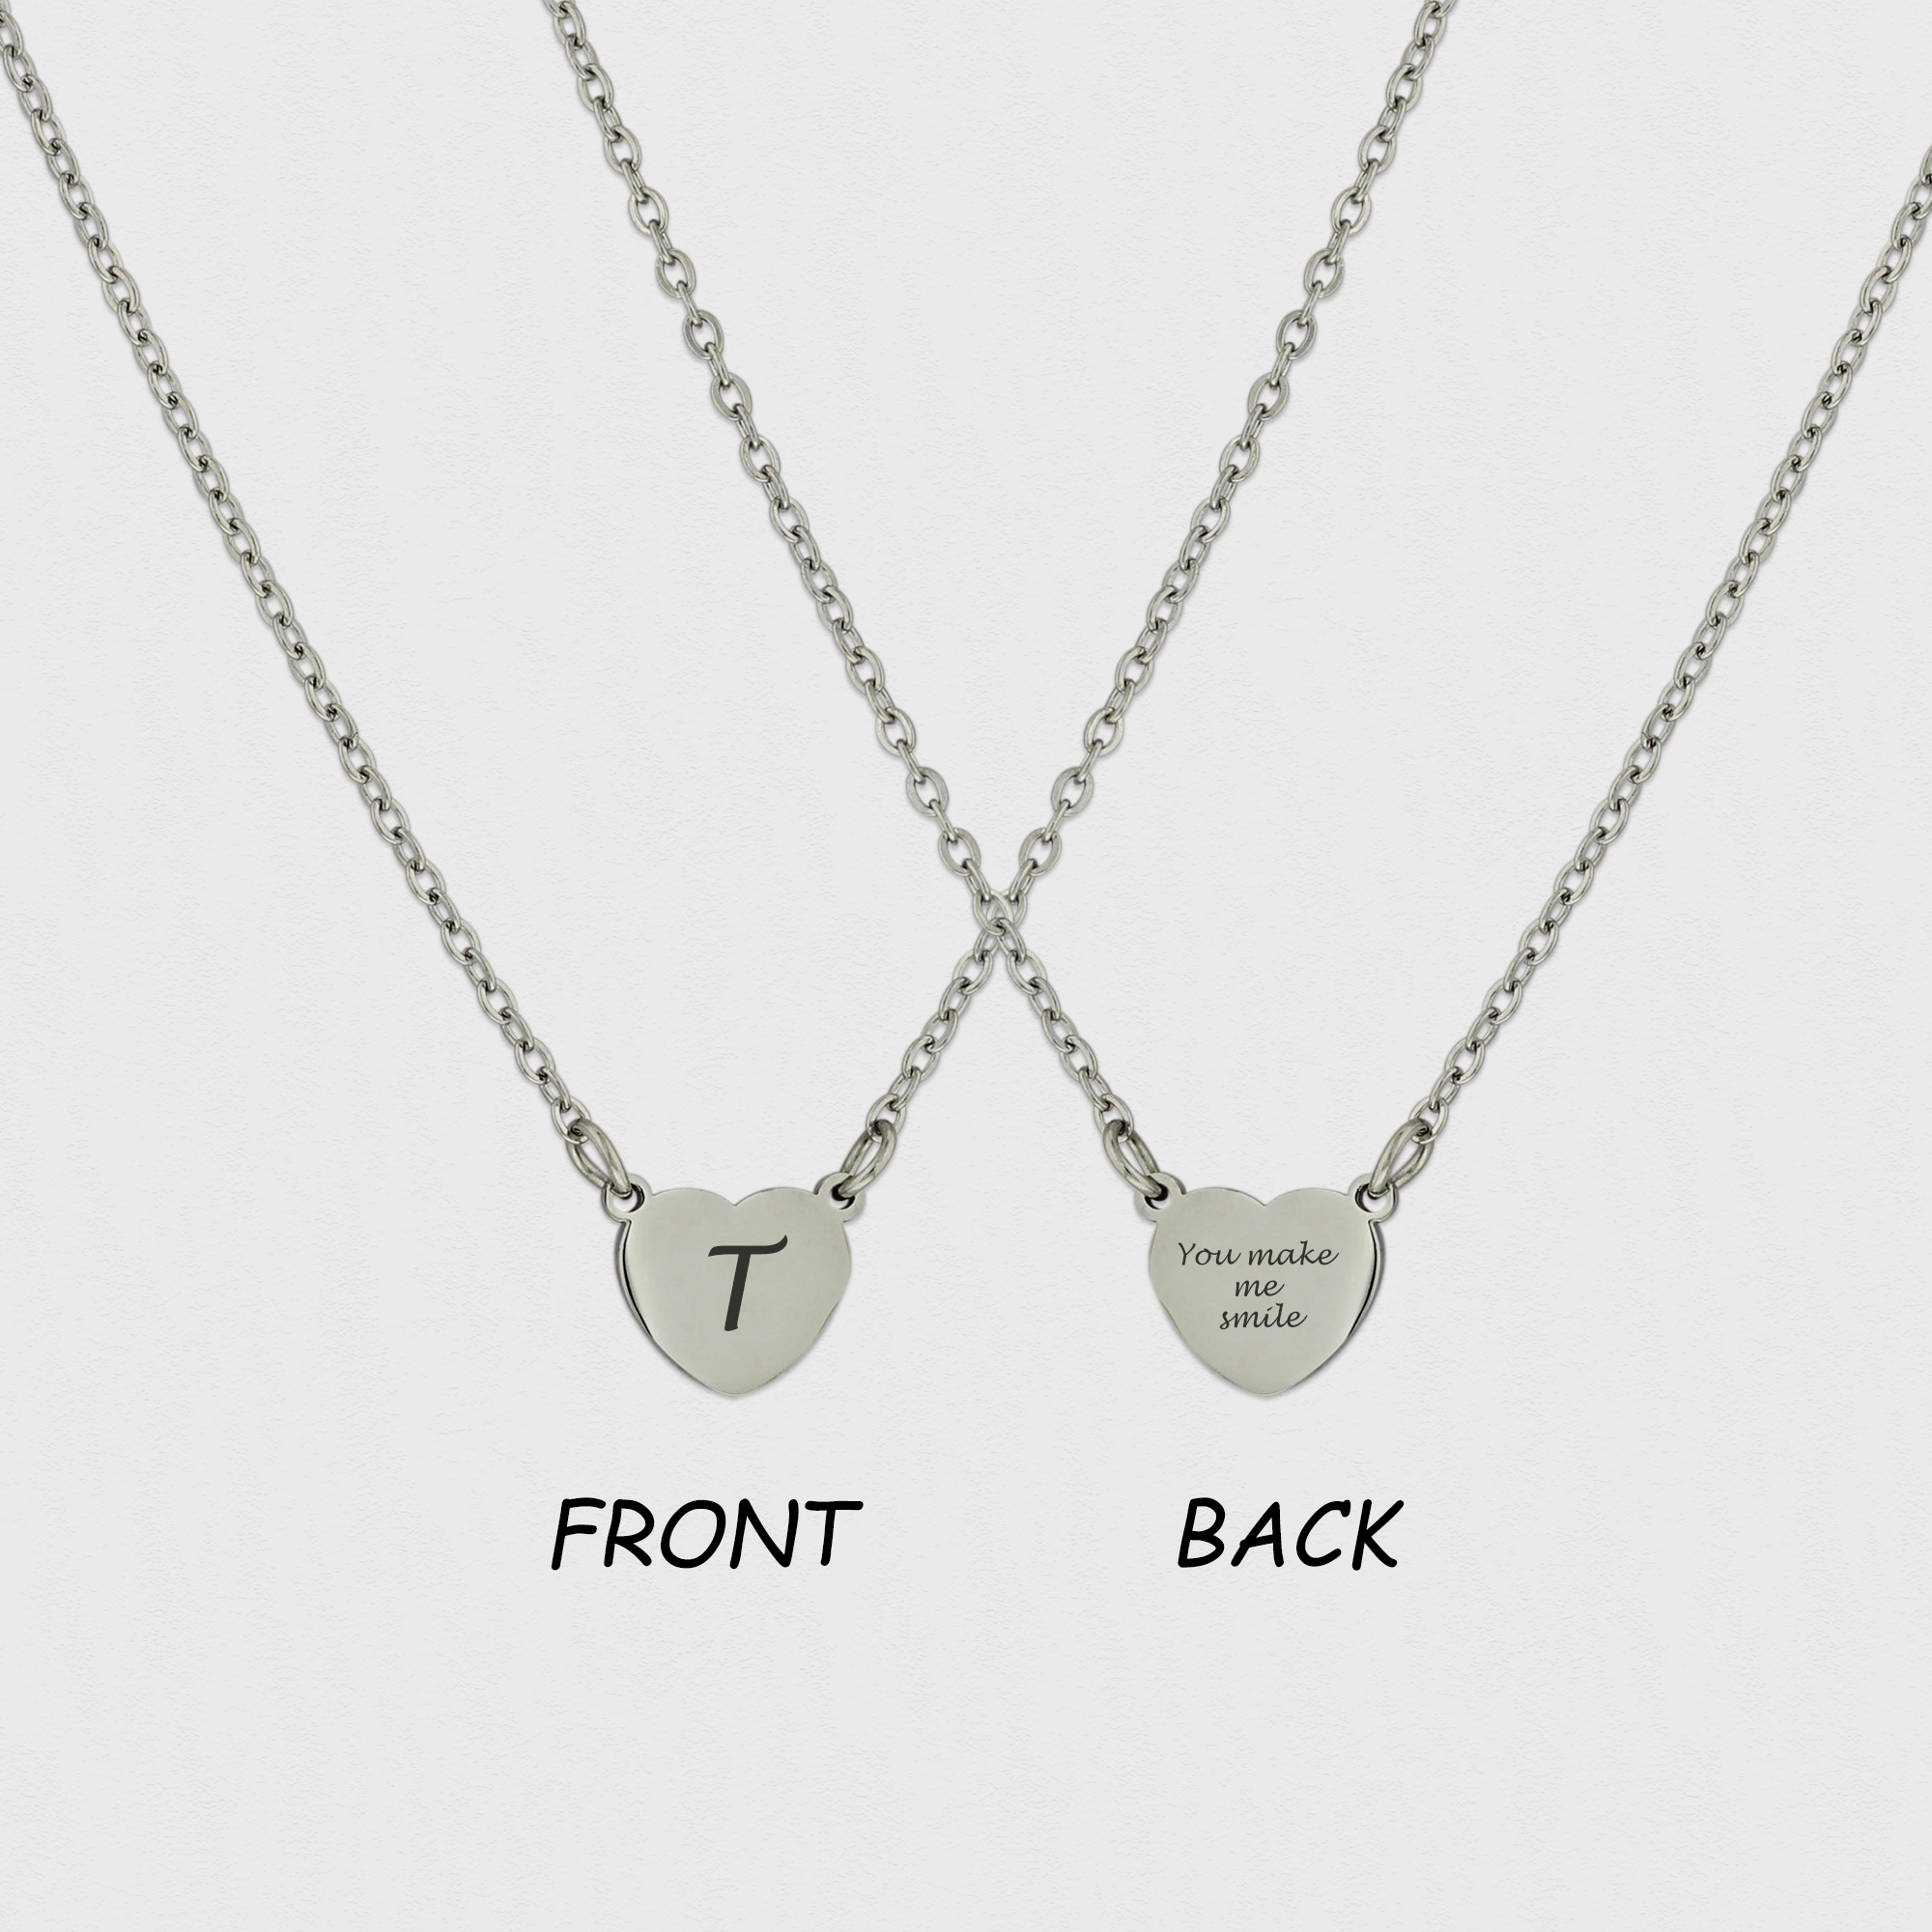 Personalized Engraved Necklaces